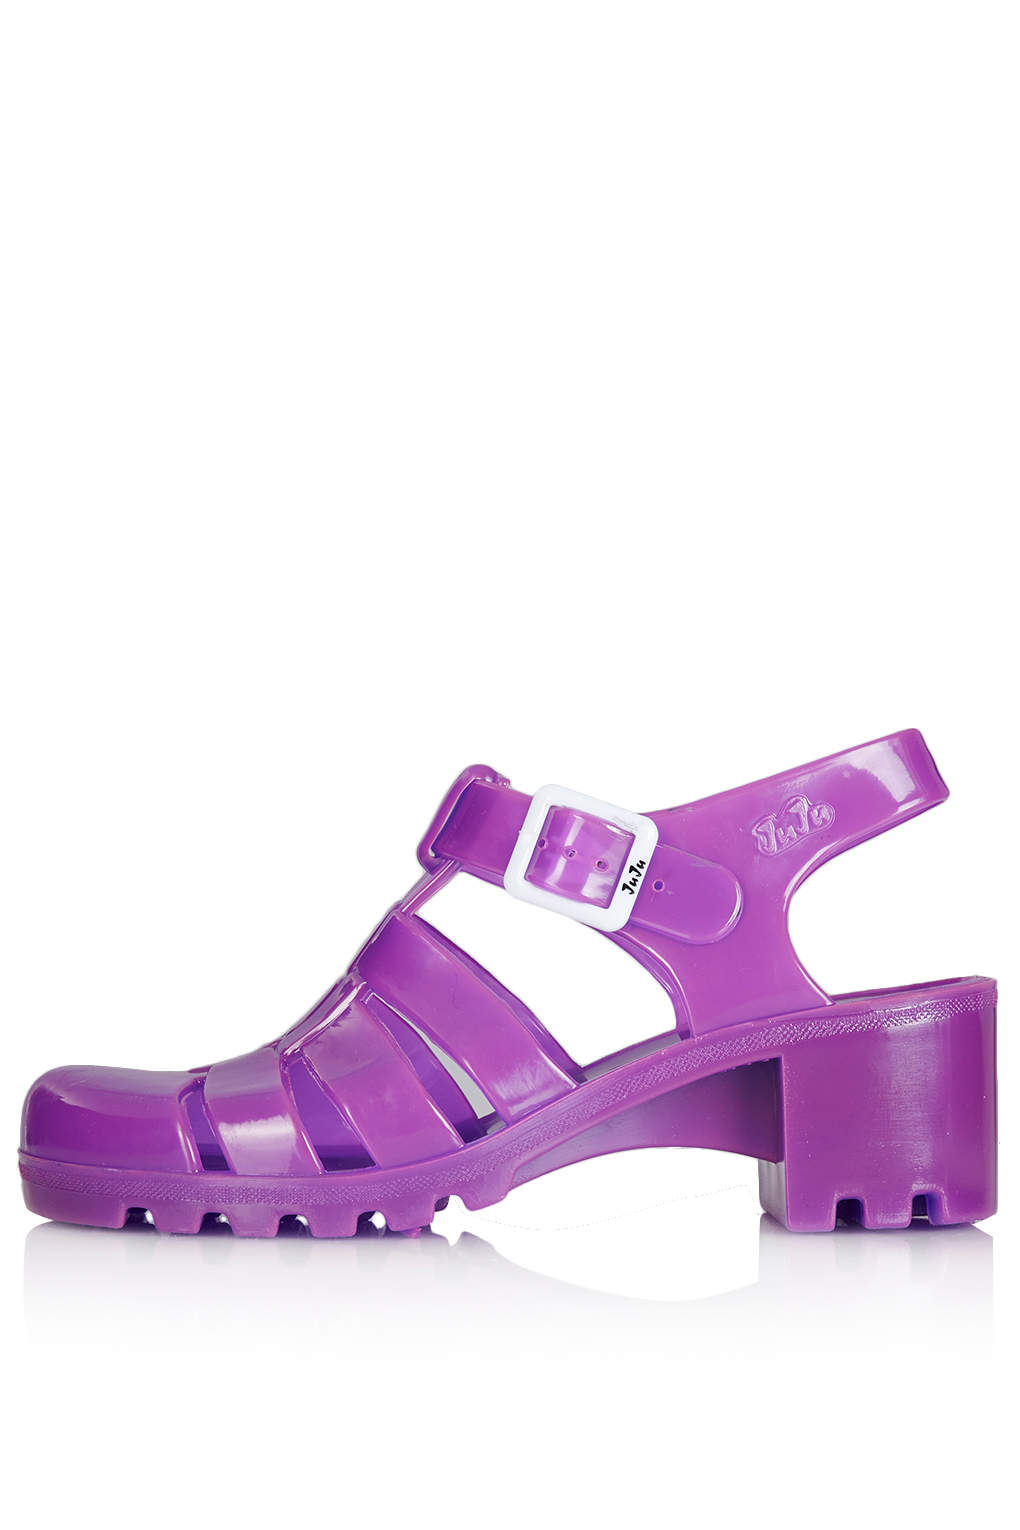 Topshop Nina Heeled Jelly  Sandals  in Purple  Lyst